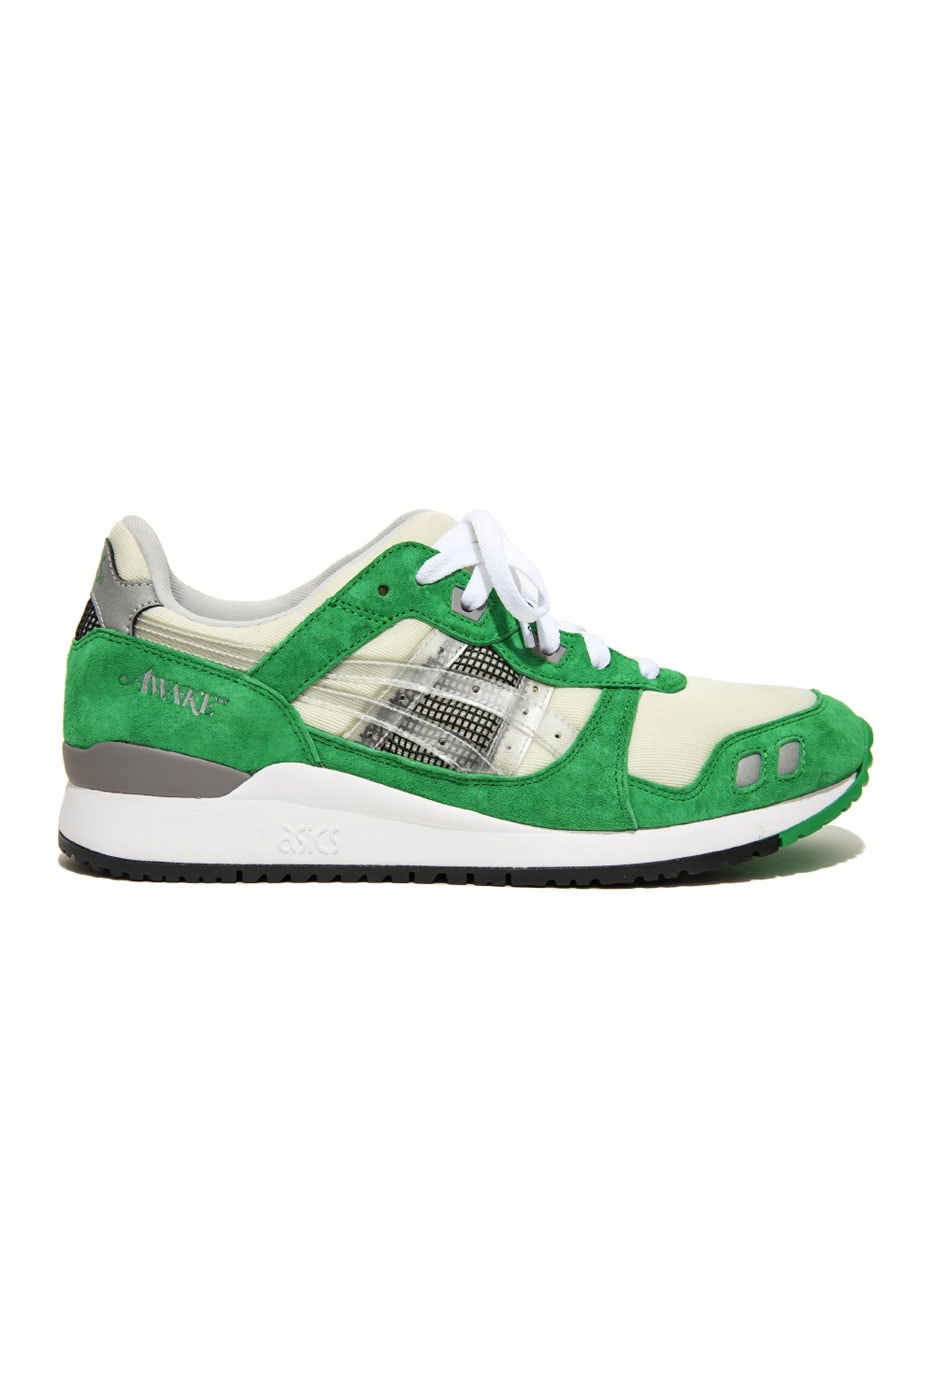 Awake NY ASICS GEL LYTE III running shoe early 90s Closer Look sound mind sound body purple black silver white green elephant blue yellow release info date price